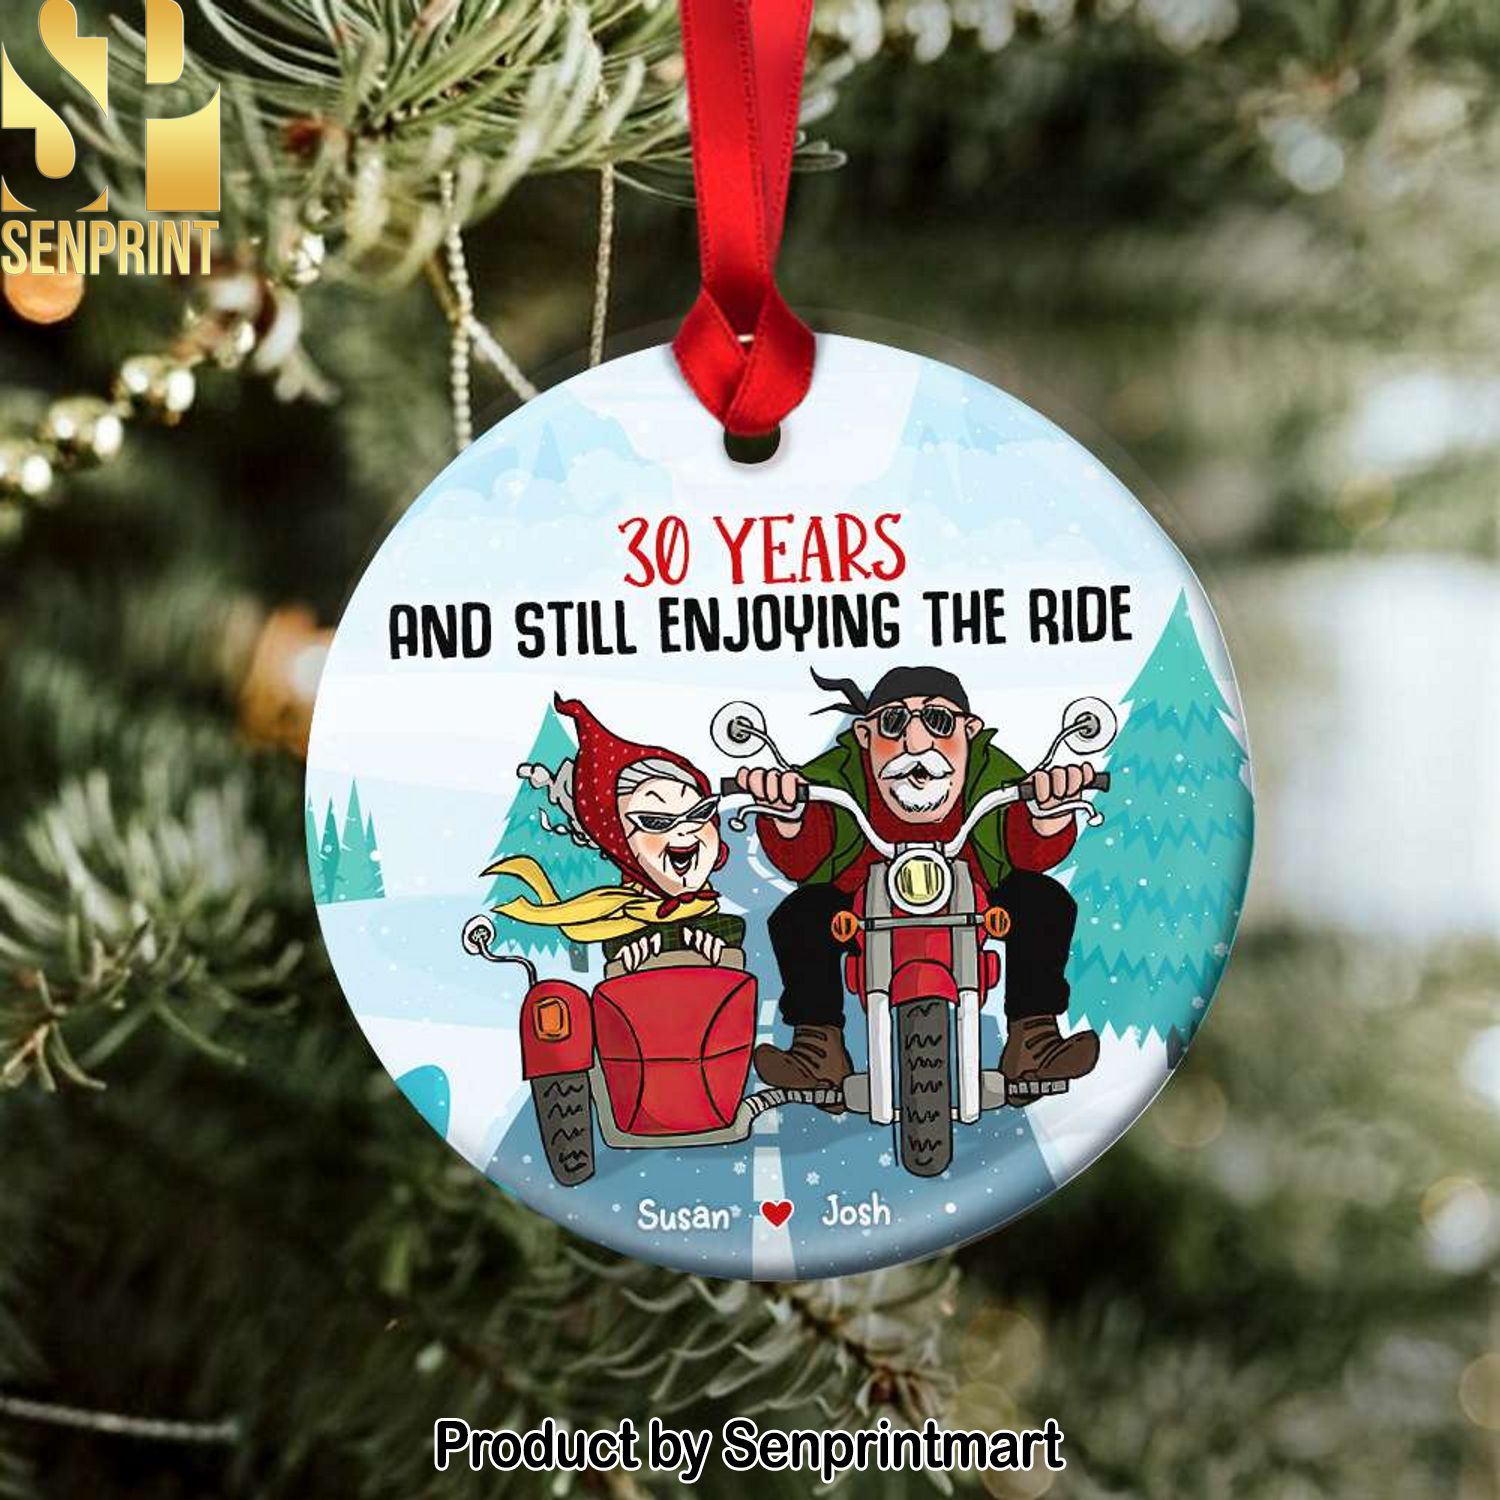 Still Enjoying The Ride, Couple Gift, Personalized Ceramic Ornament, Old Couple Biker Ornament, Christmas Gift